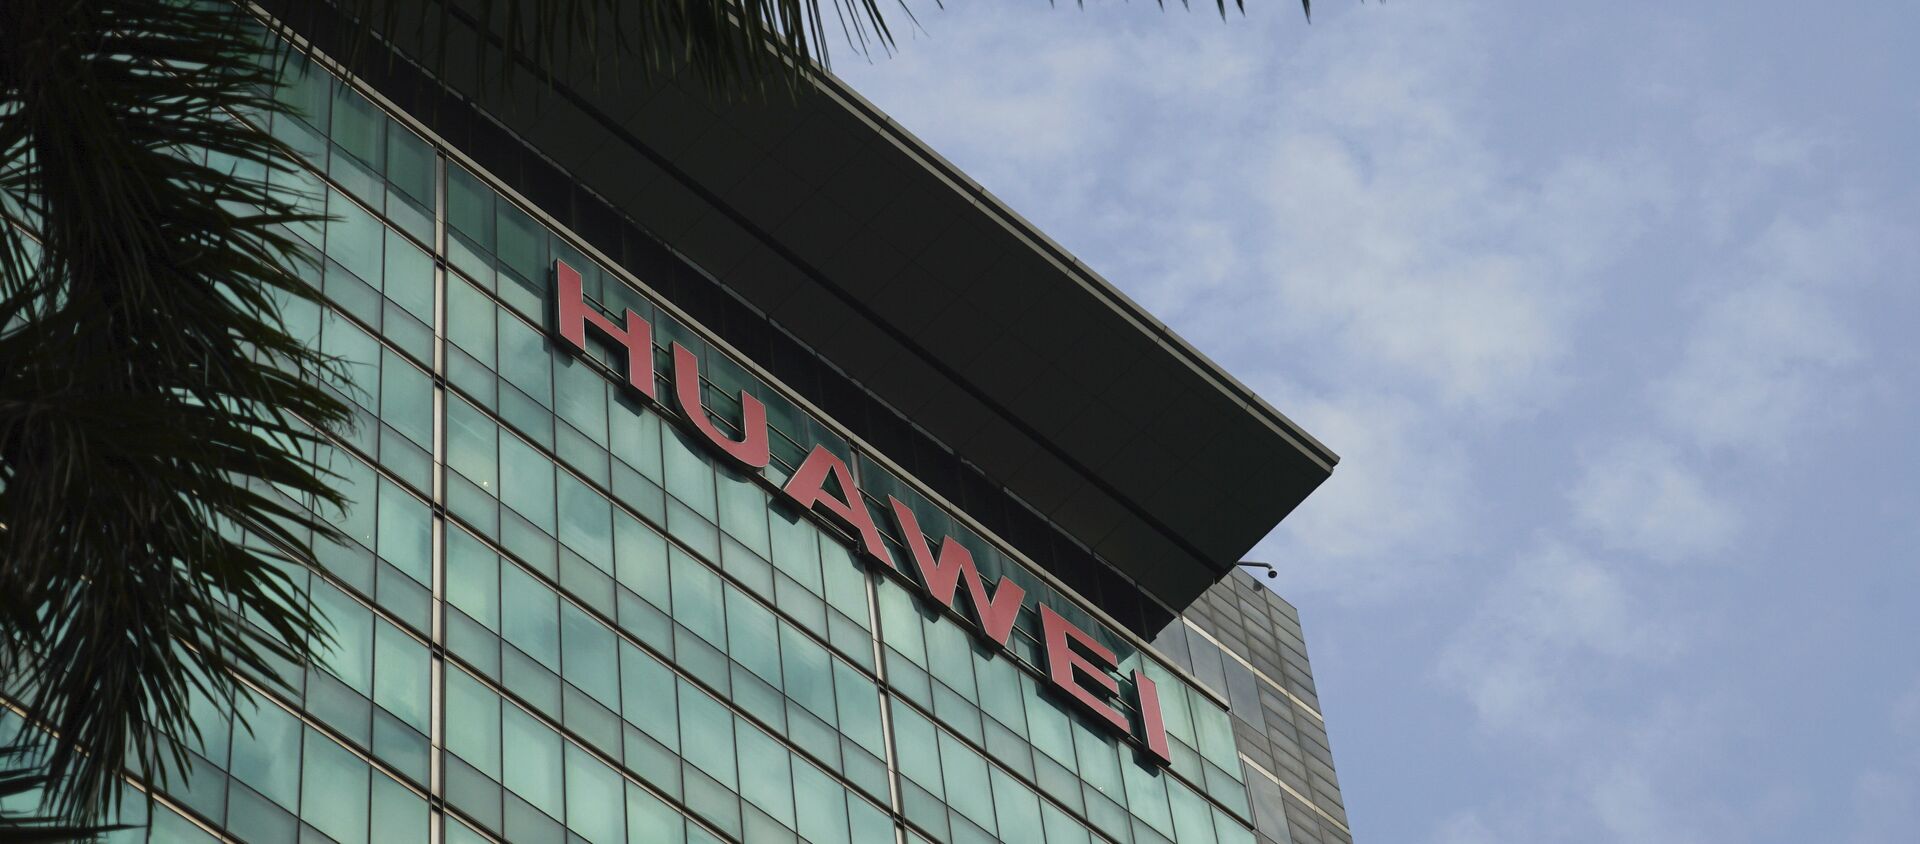 In this March 13, 2018, photo, the logo of Huawei is displayed at its headquarters in Shenzhen in southern China's Guangdong Province. - Sputnik Việt Nam, 1920, 24.04.2020